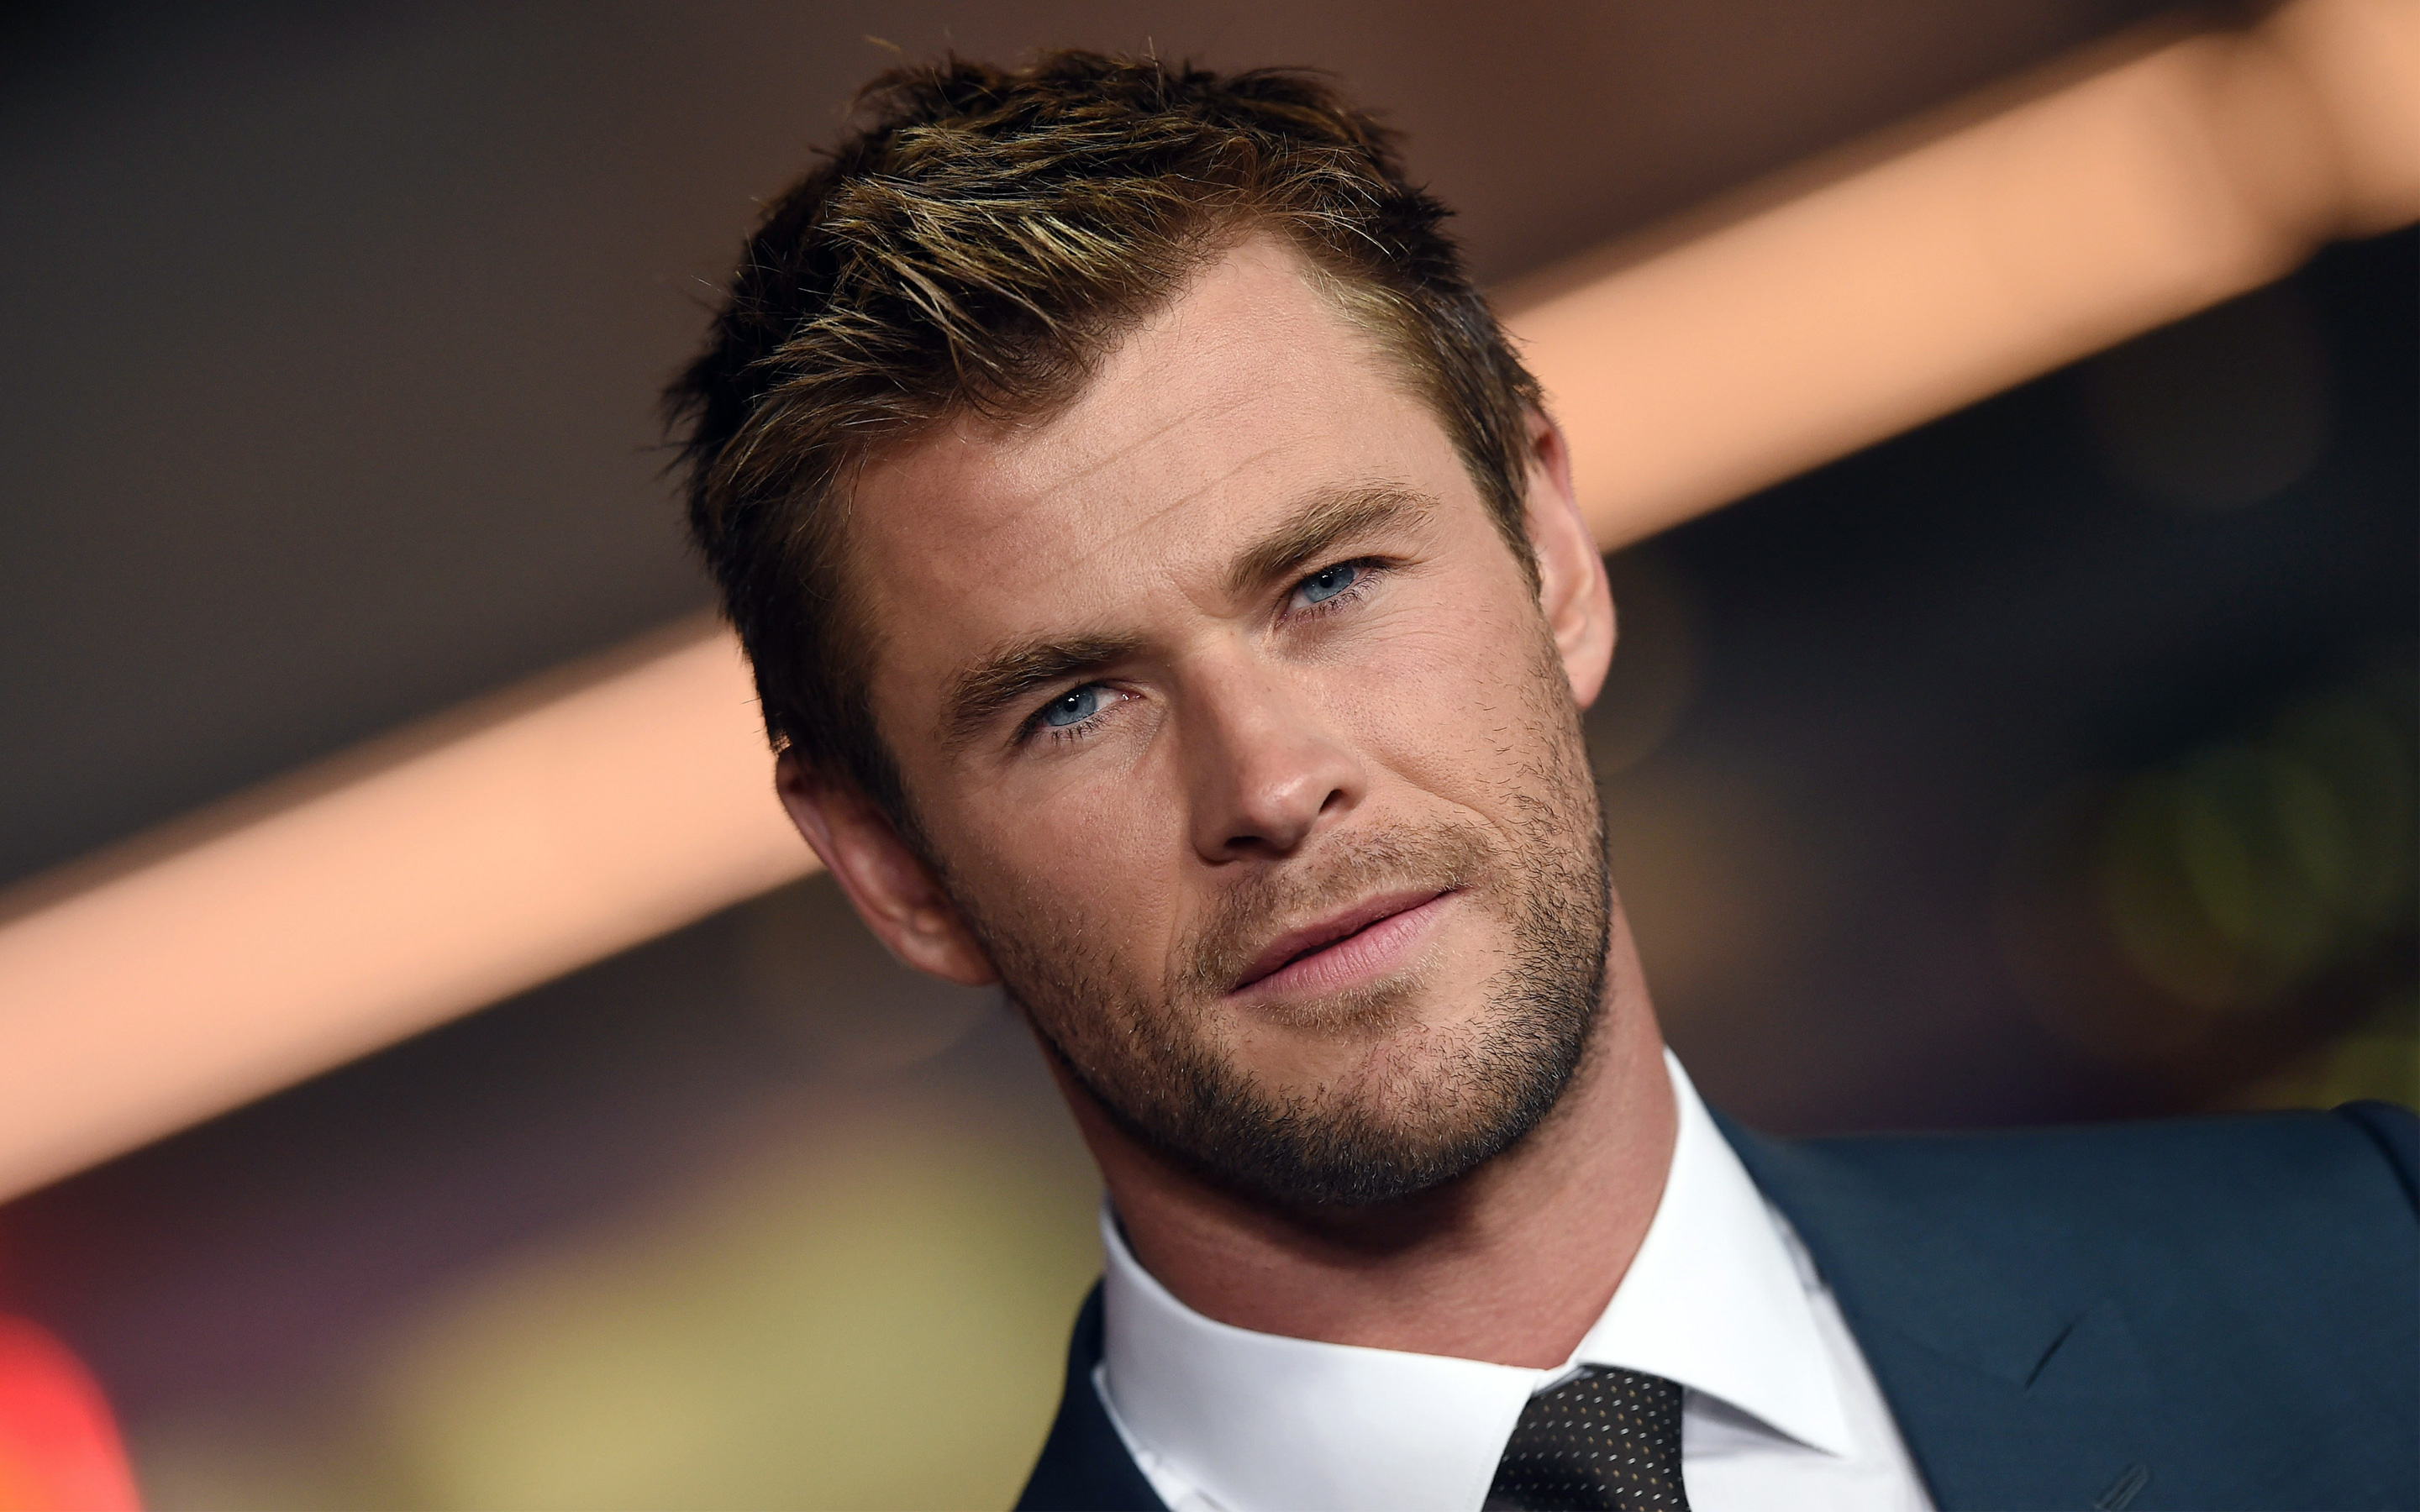 Chris Hemsworth: Gained worldwide recognition for his recurring role as “Thor” in Marvel's “Thor” and “Avengers” movies. 2880x1800 HD Background.